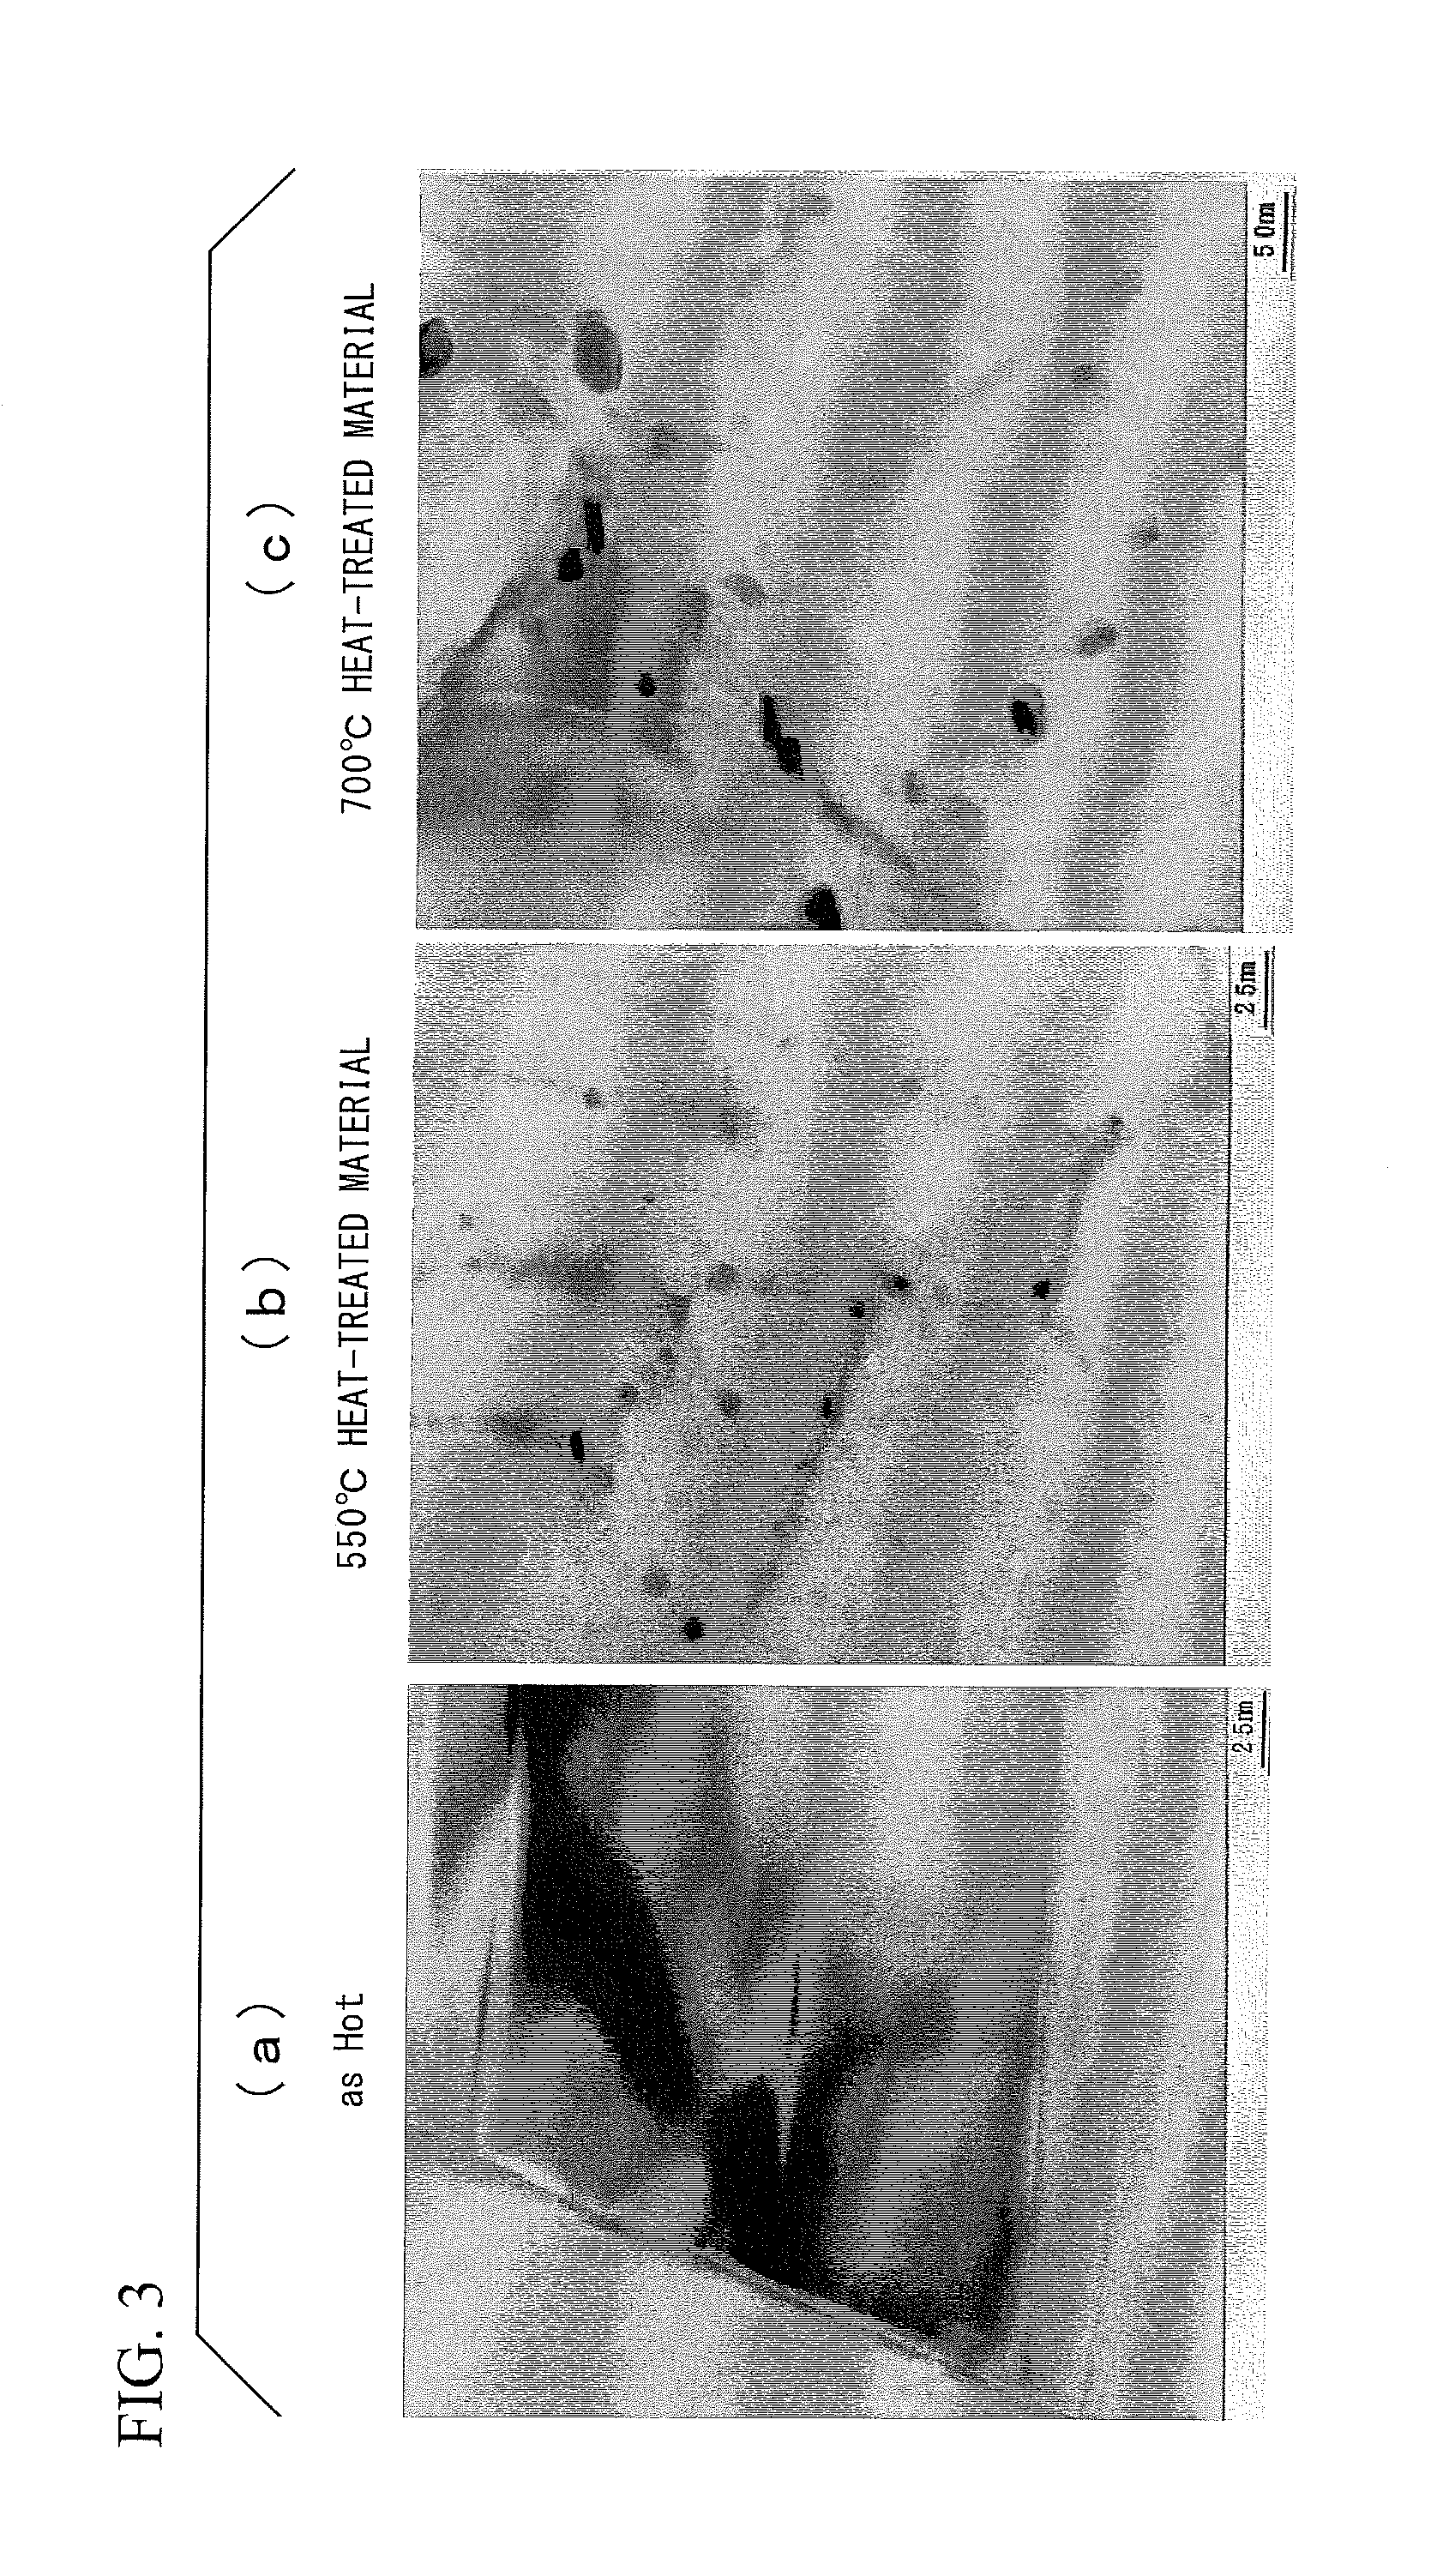 Hot rolled ferritic stainless steel sheet, method for producing same, and method for producing ferritic stainless steel sheet